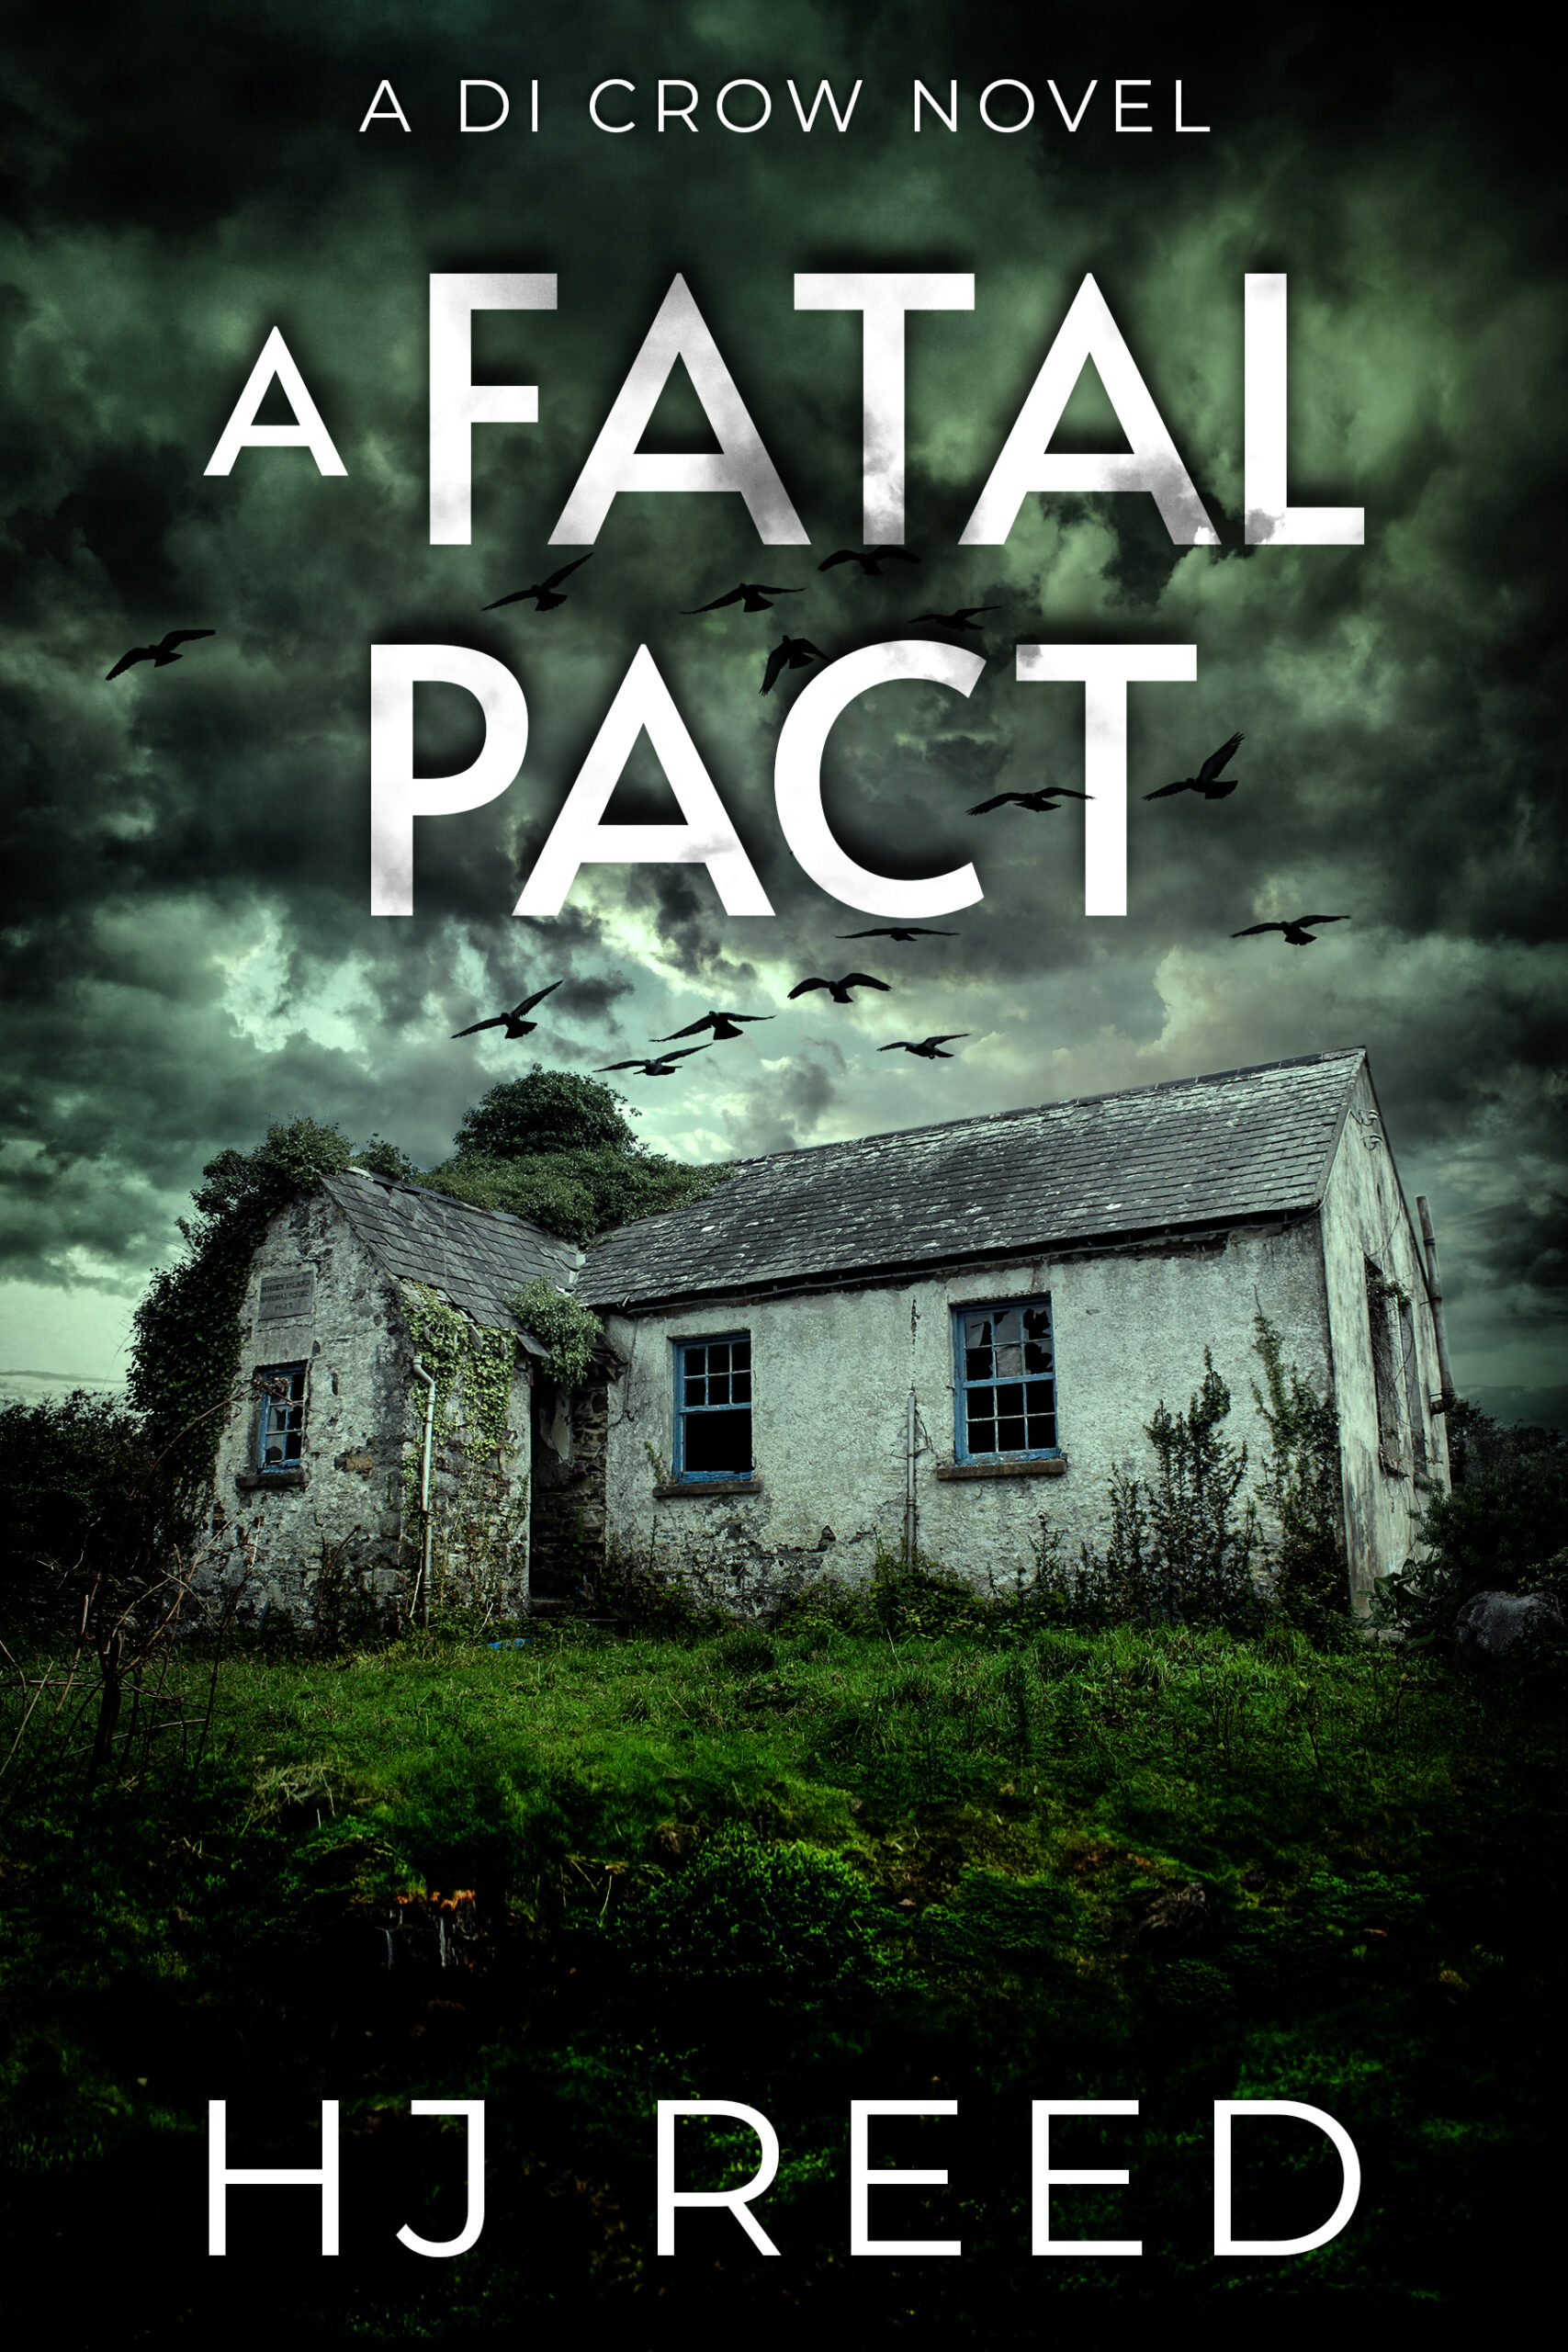 HJ REED NEW RELEASE – A FATAL PACT